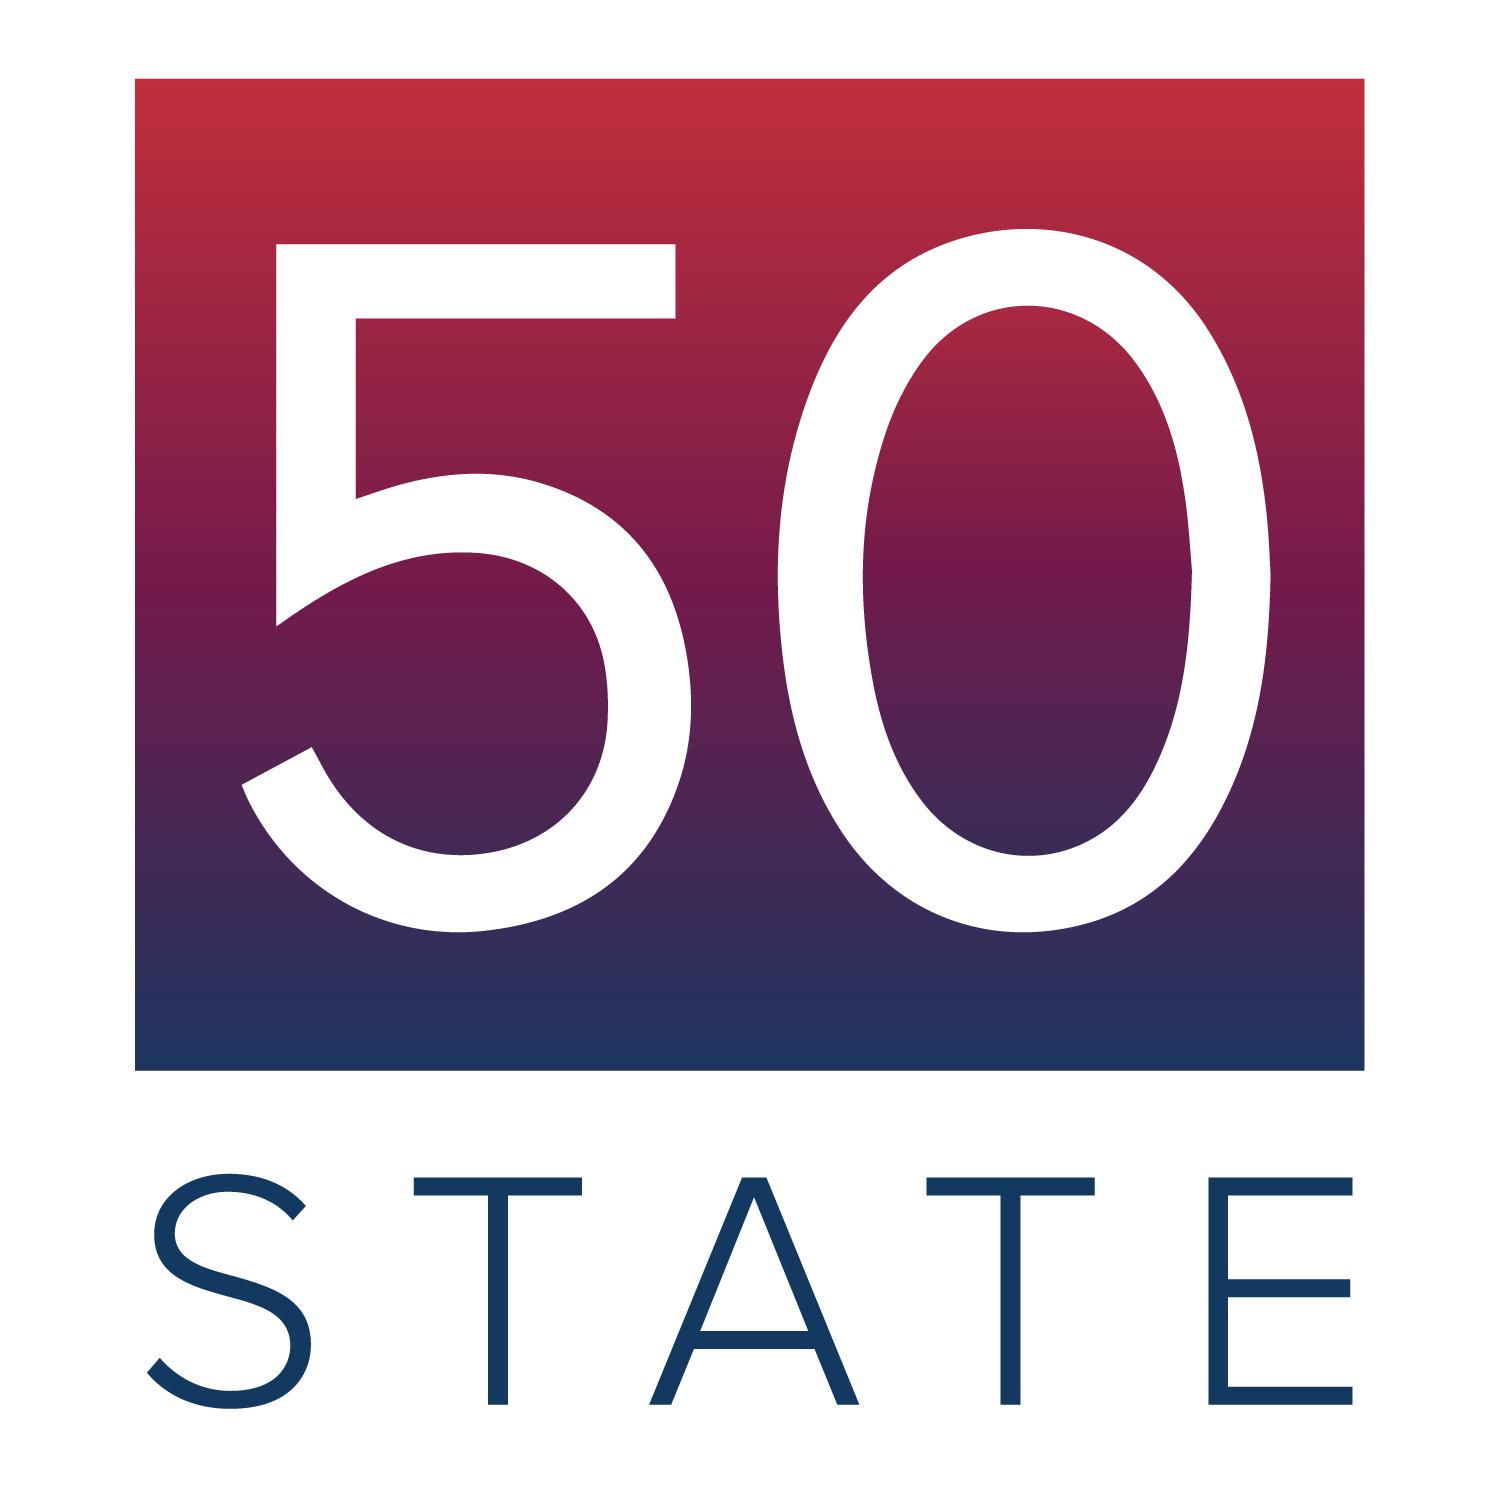 50 State